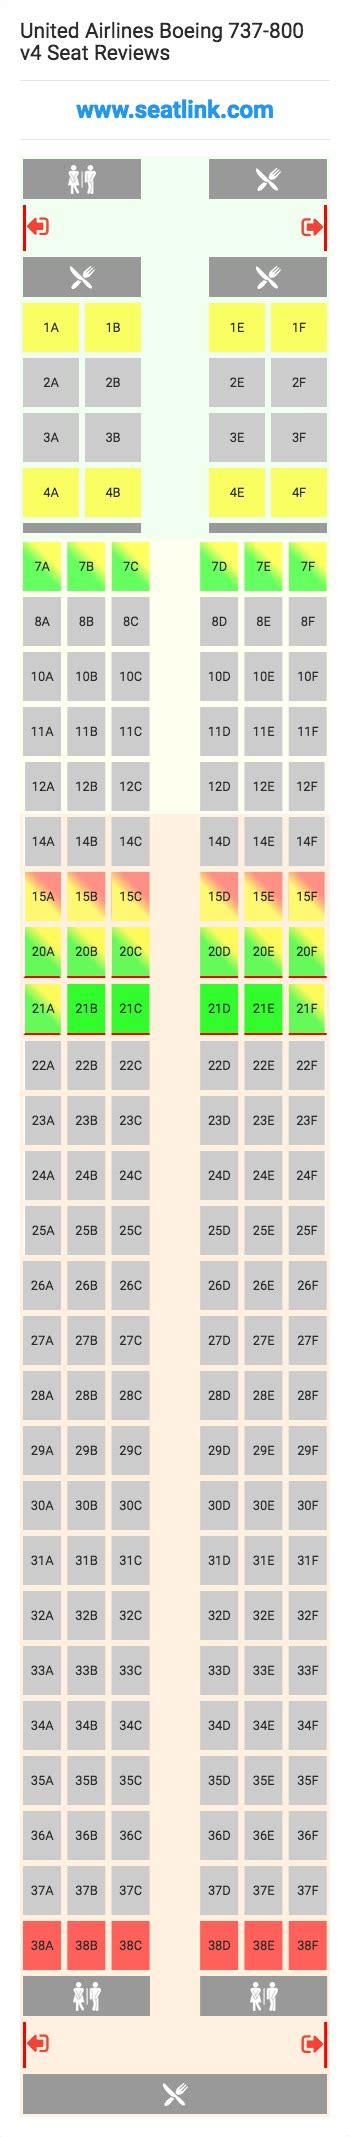 Southwest Airlines Boeing 737 800 Seating Chart Elcho Table